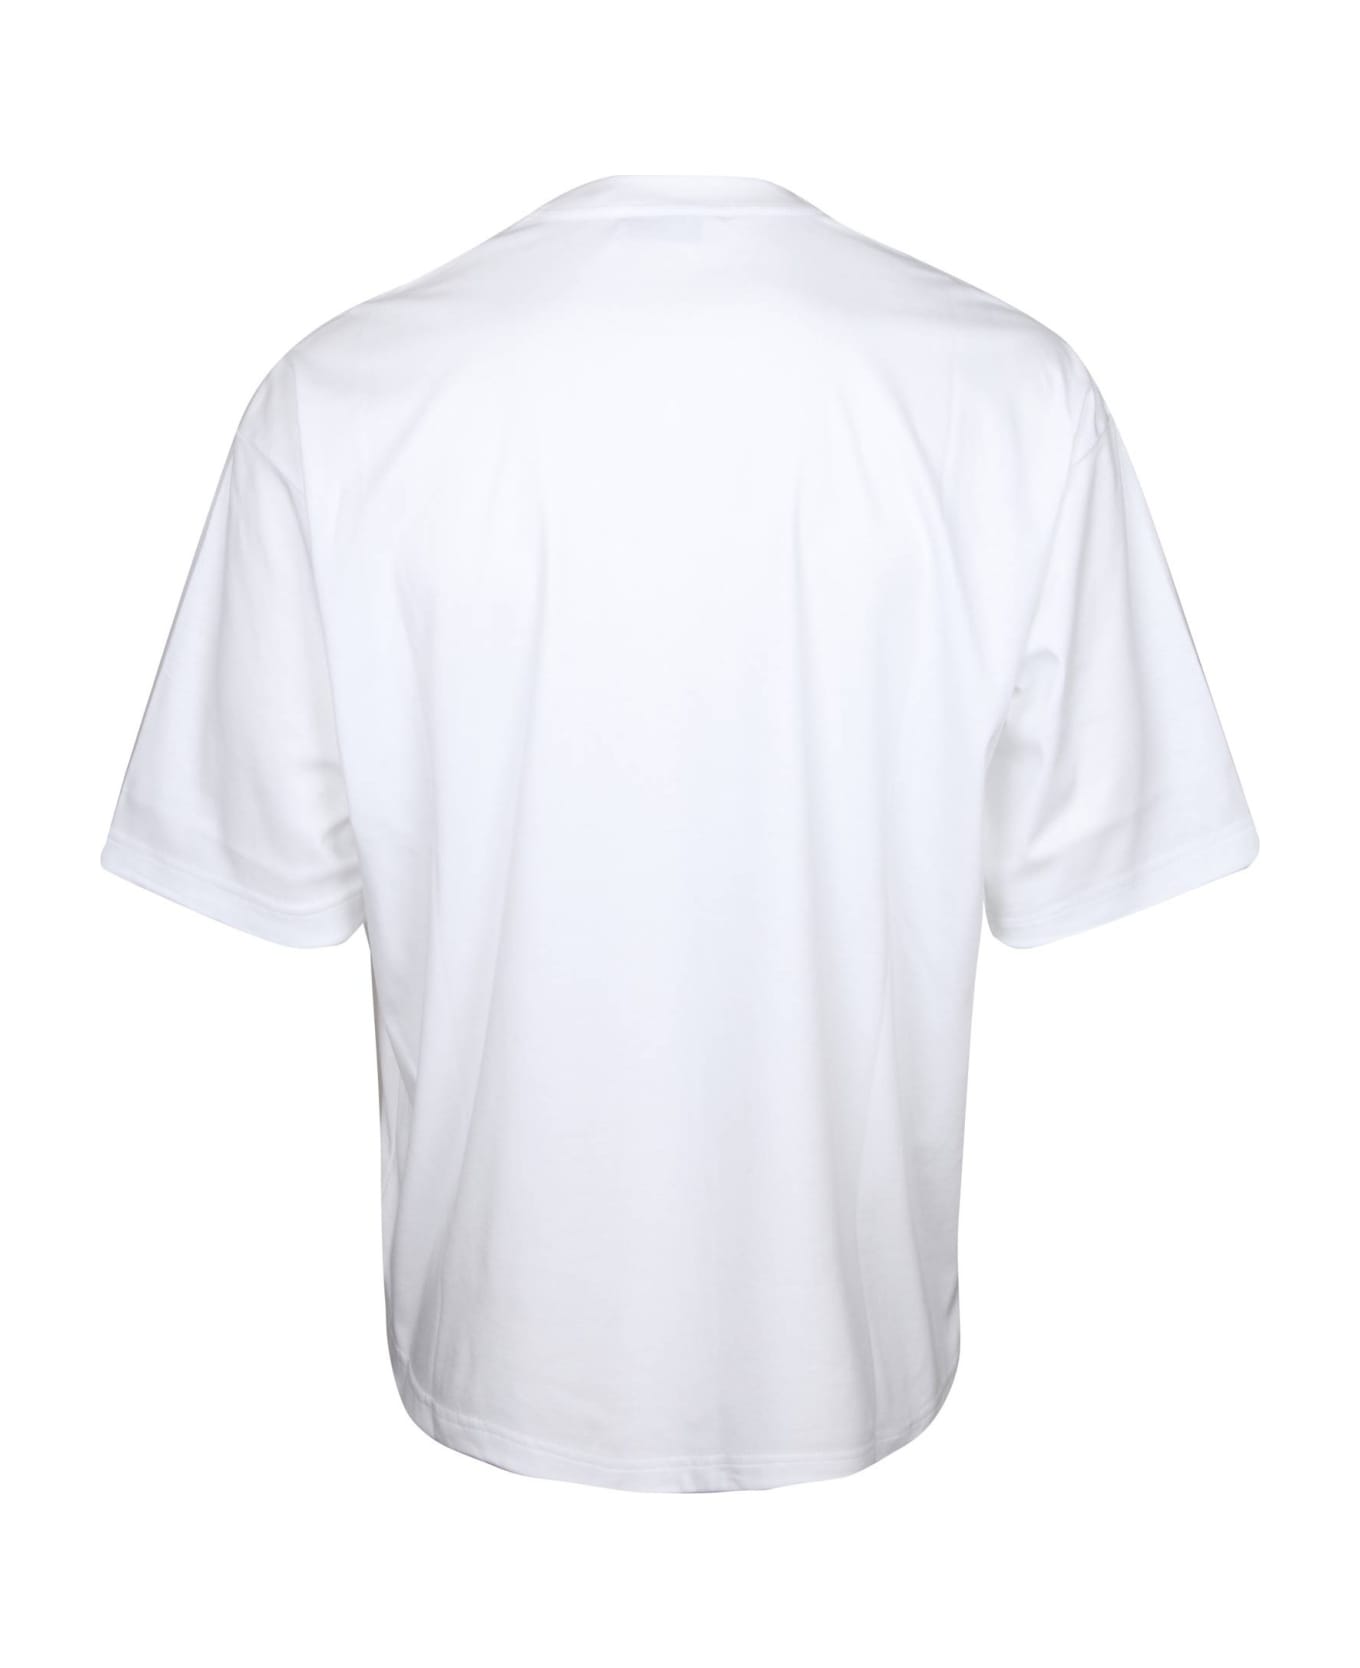 Lanvin Curblace T-shirt In White Cotton - Optic White